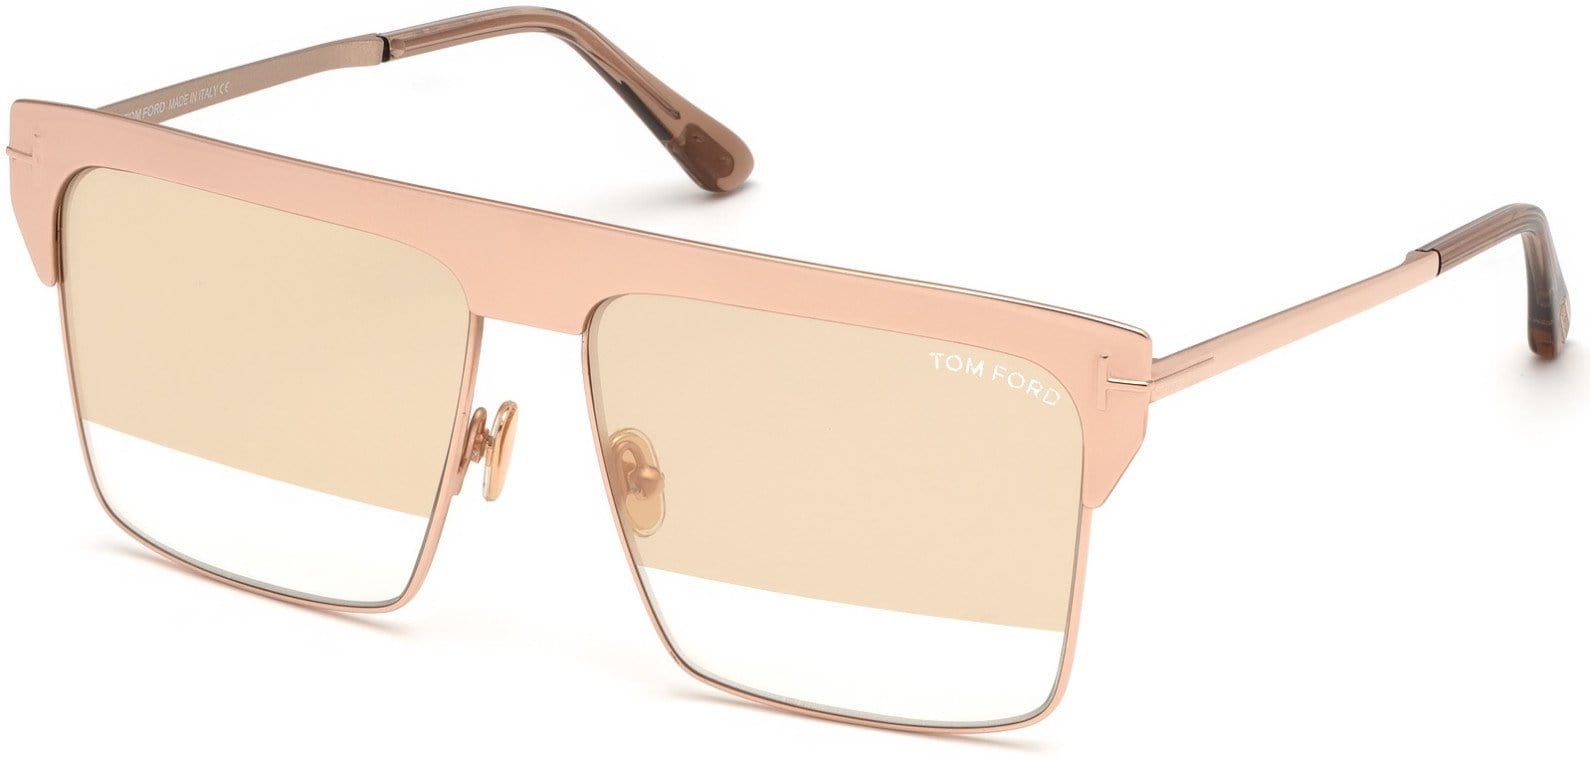 Tom Ford FT0706 West Geometric Sunglasses 33Z-33Z - Rose Gold Plated/ Clear W. Rose Gold Plated Flash Lenses